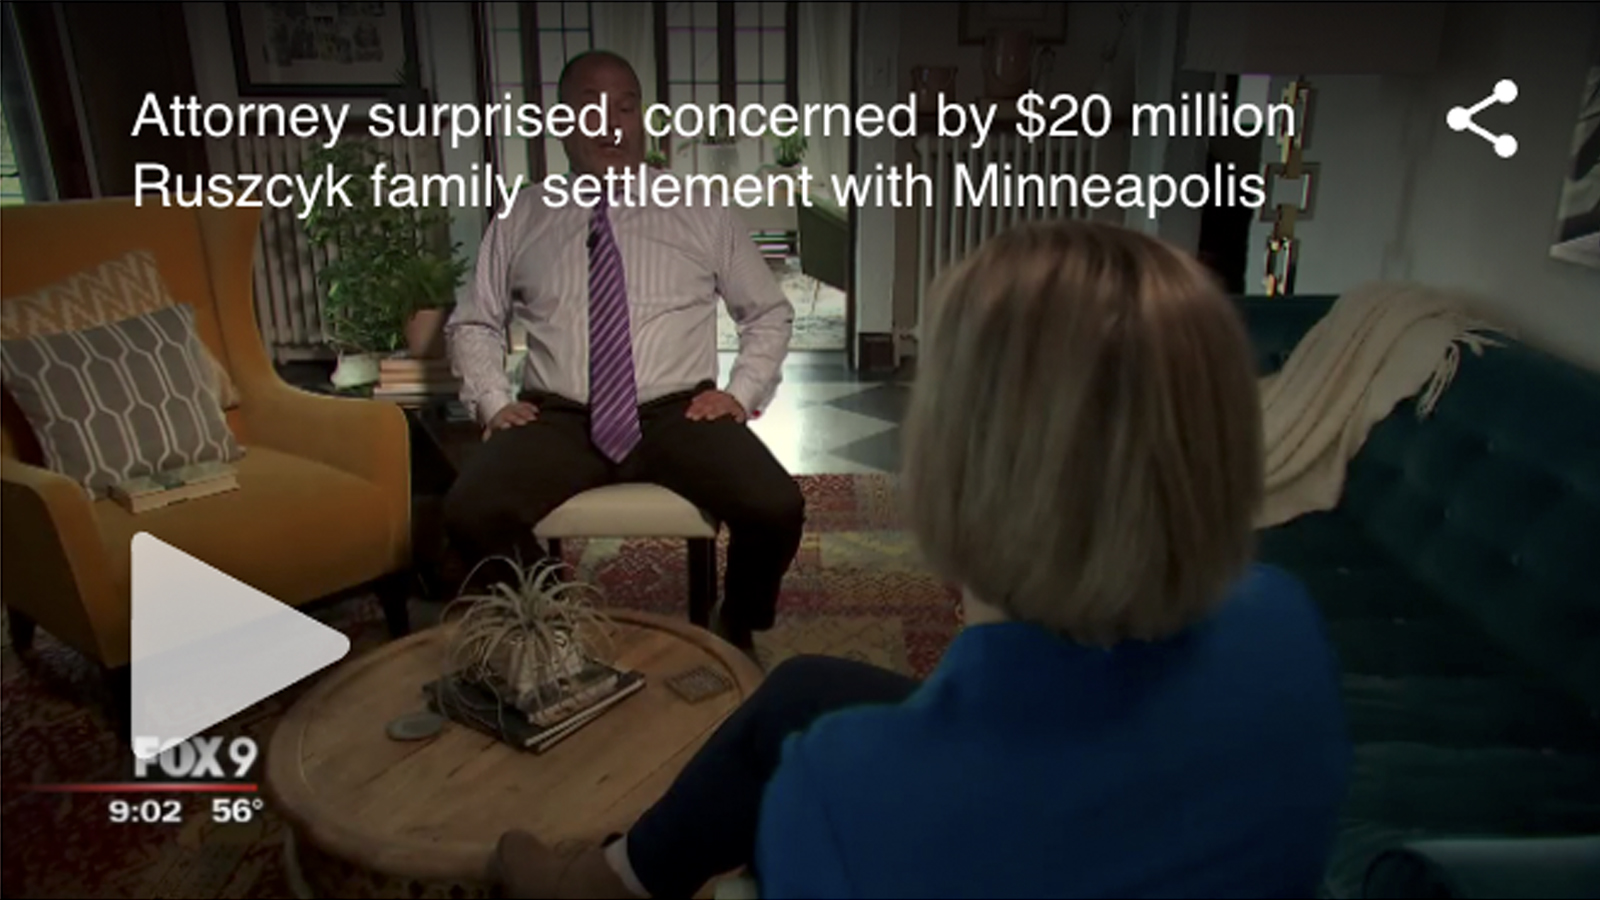 Attorney Surprised, Concerned by $20 Million Ruszcyk Family Settlement With Minneapolis